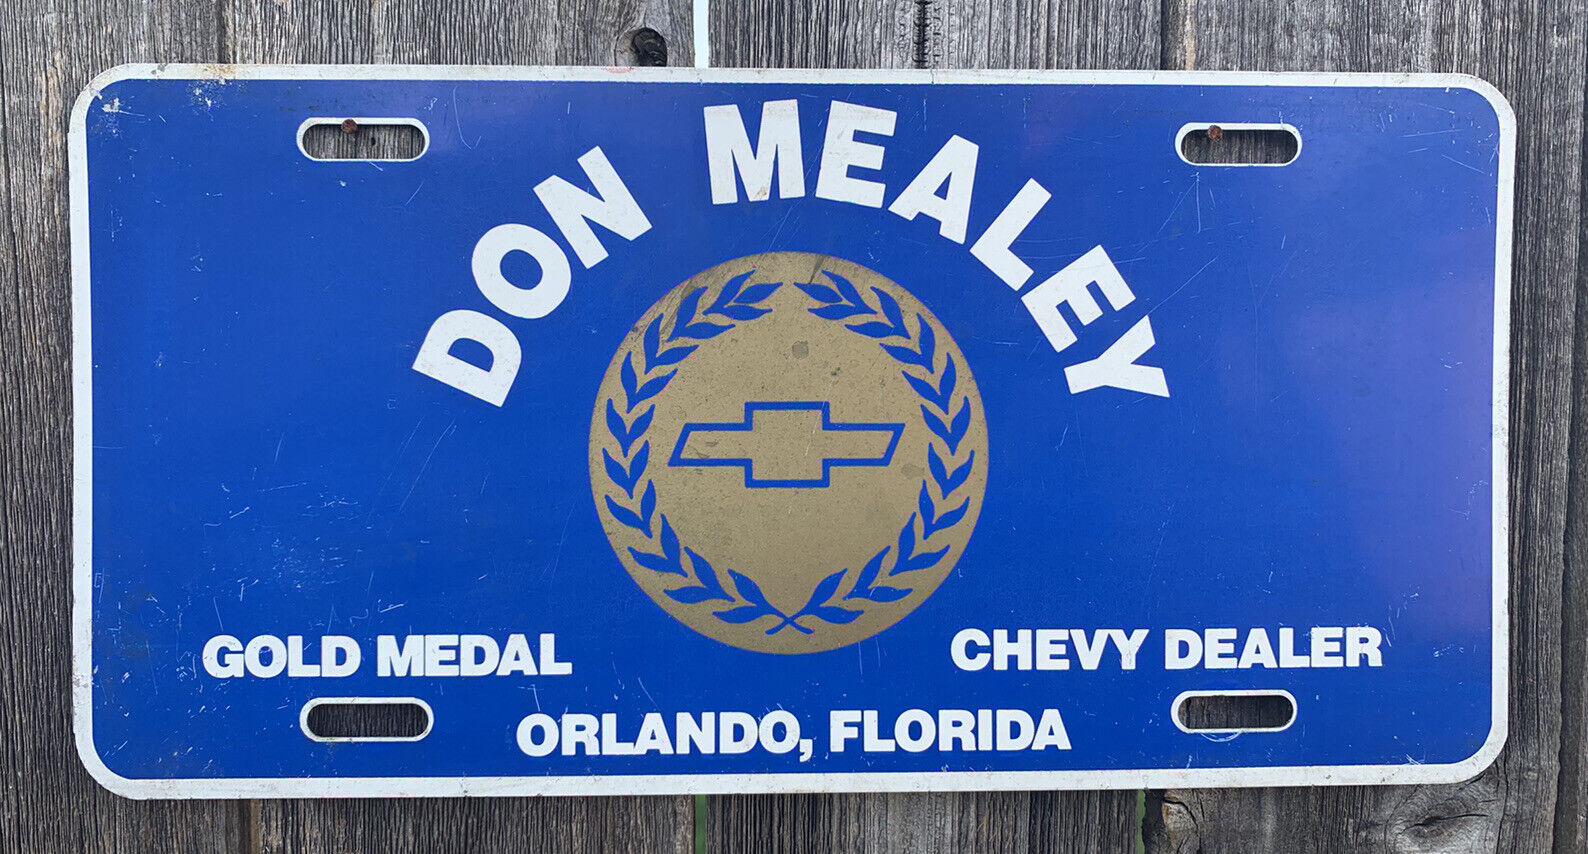 DON MEALEY DEALERSHIP LICENSE PLATE ORLANDO FLORIDA CHEVY CHEVROLET GOLD MEDAL